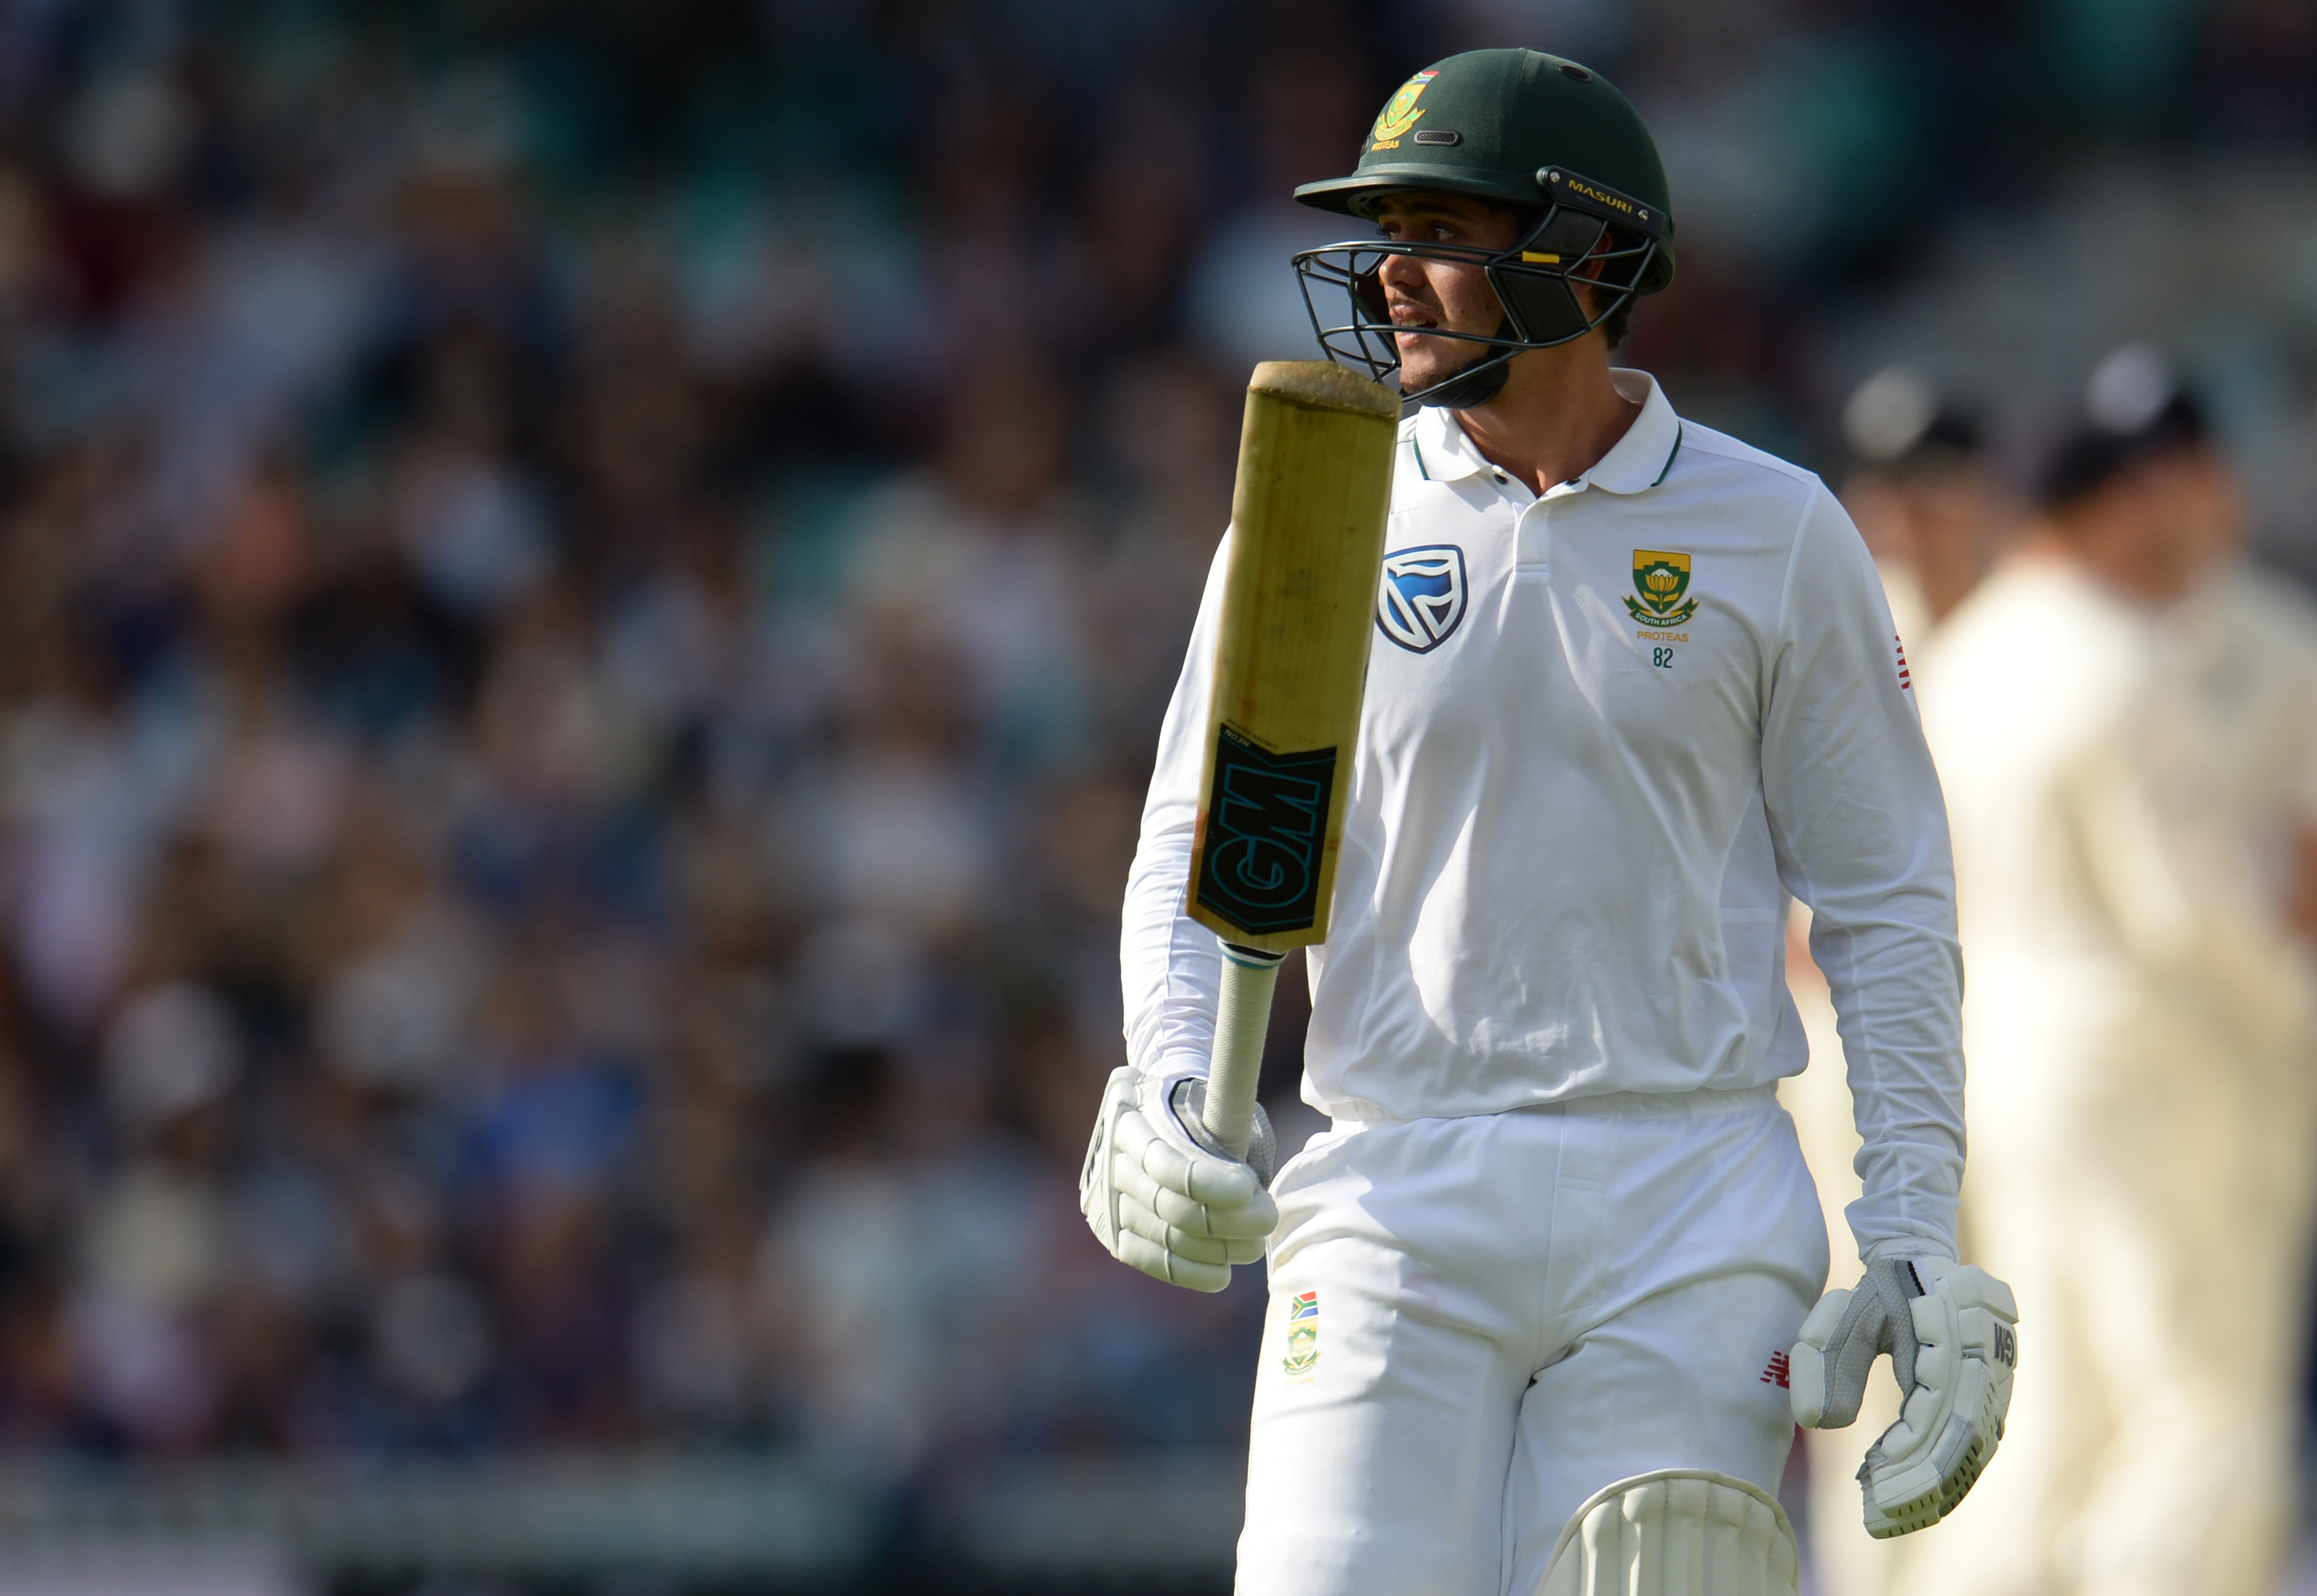 Lot of nerves when it comes to bubble life, small things get to you, insists Quinton de Kock 